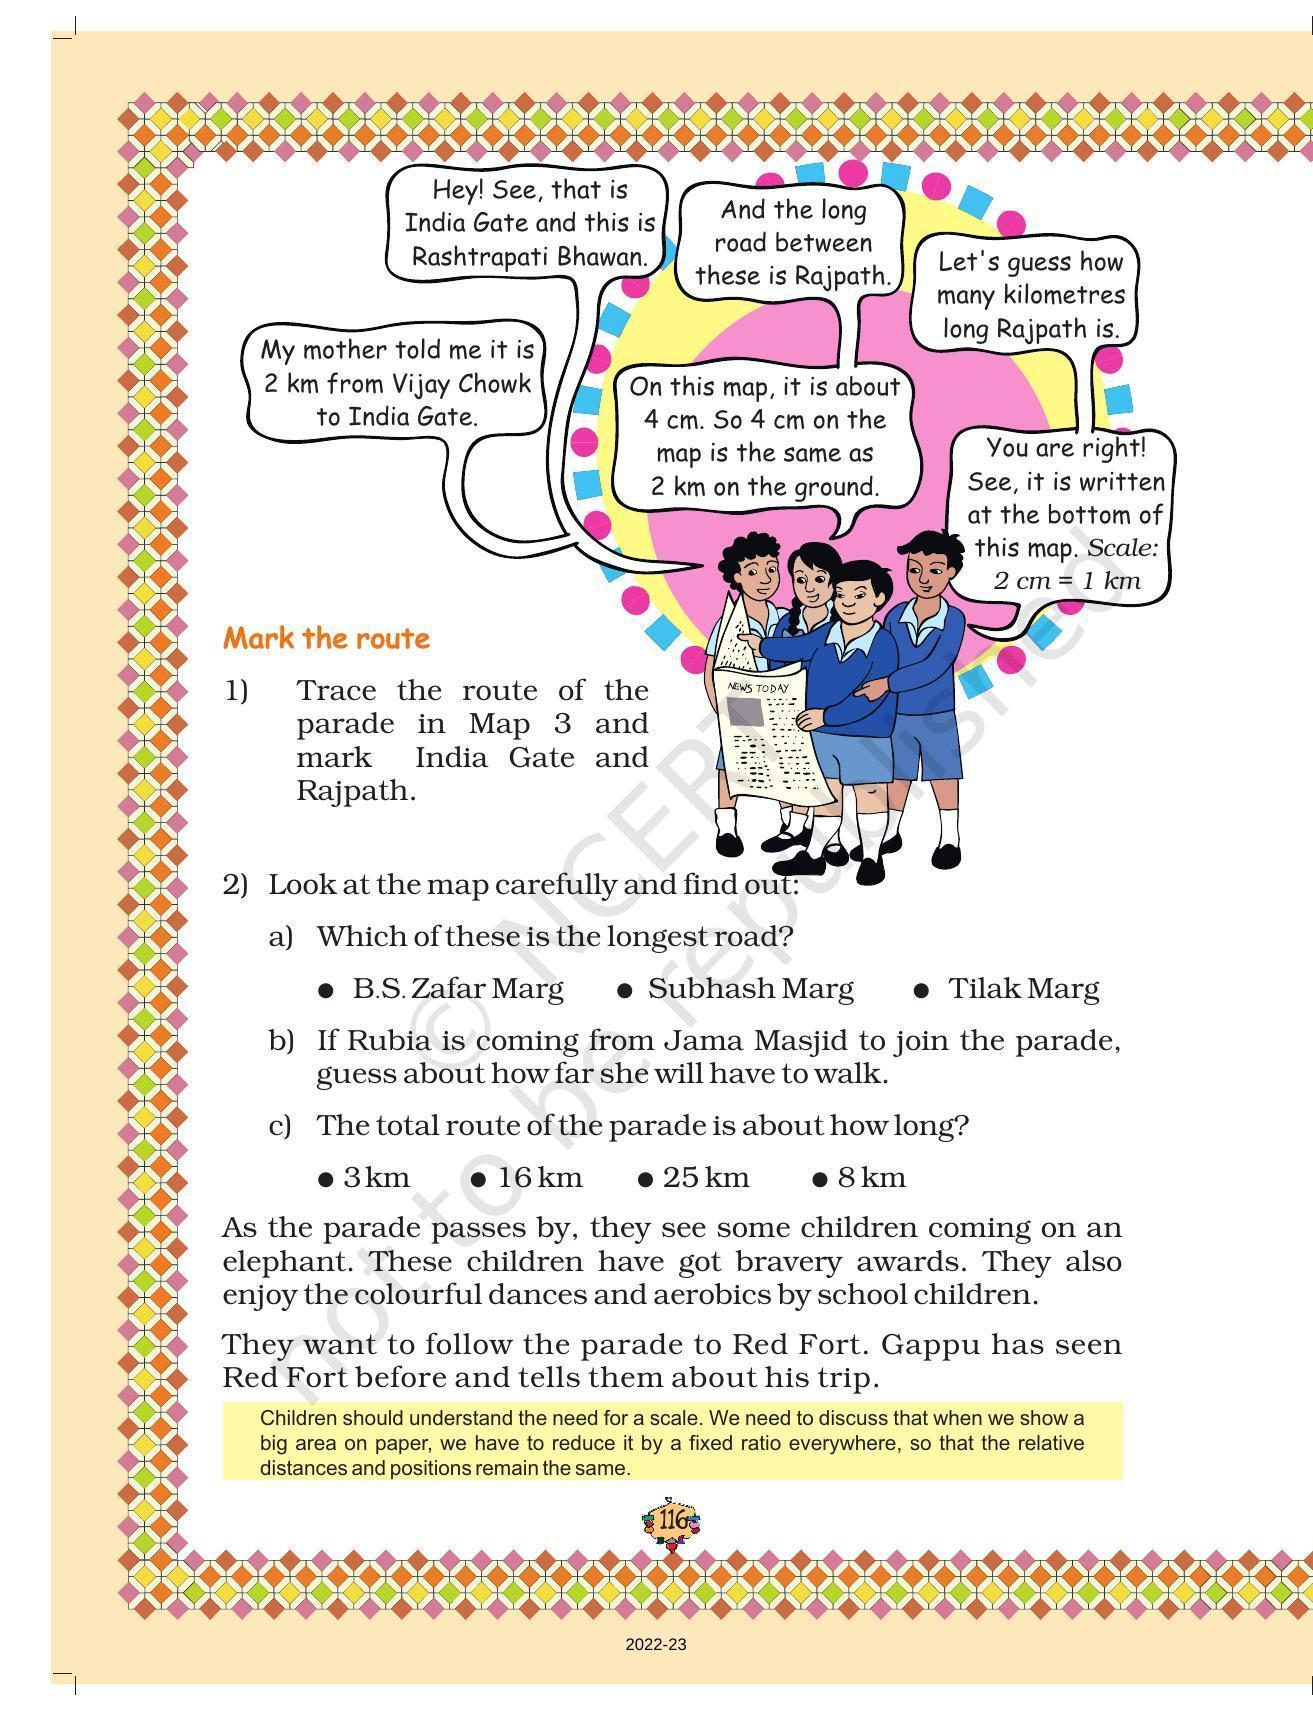 NCERT Book for Class 5 Maths Chapter 8 Mapping Your Way - Page 5